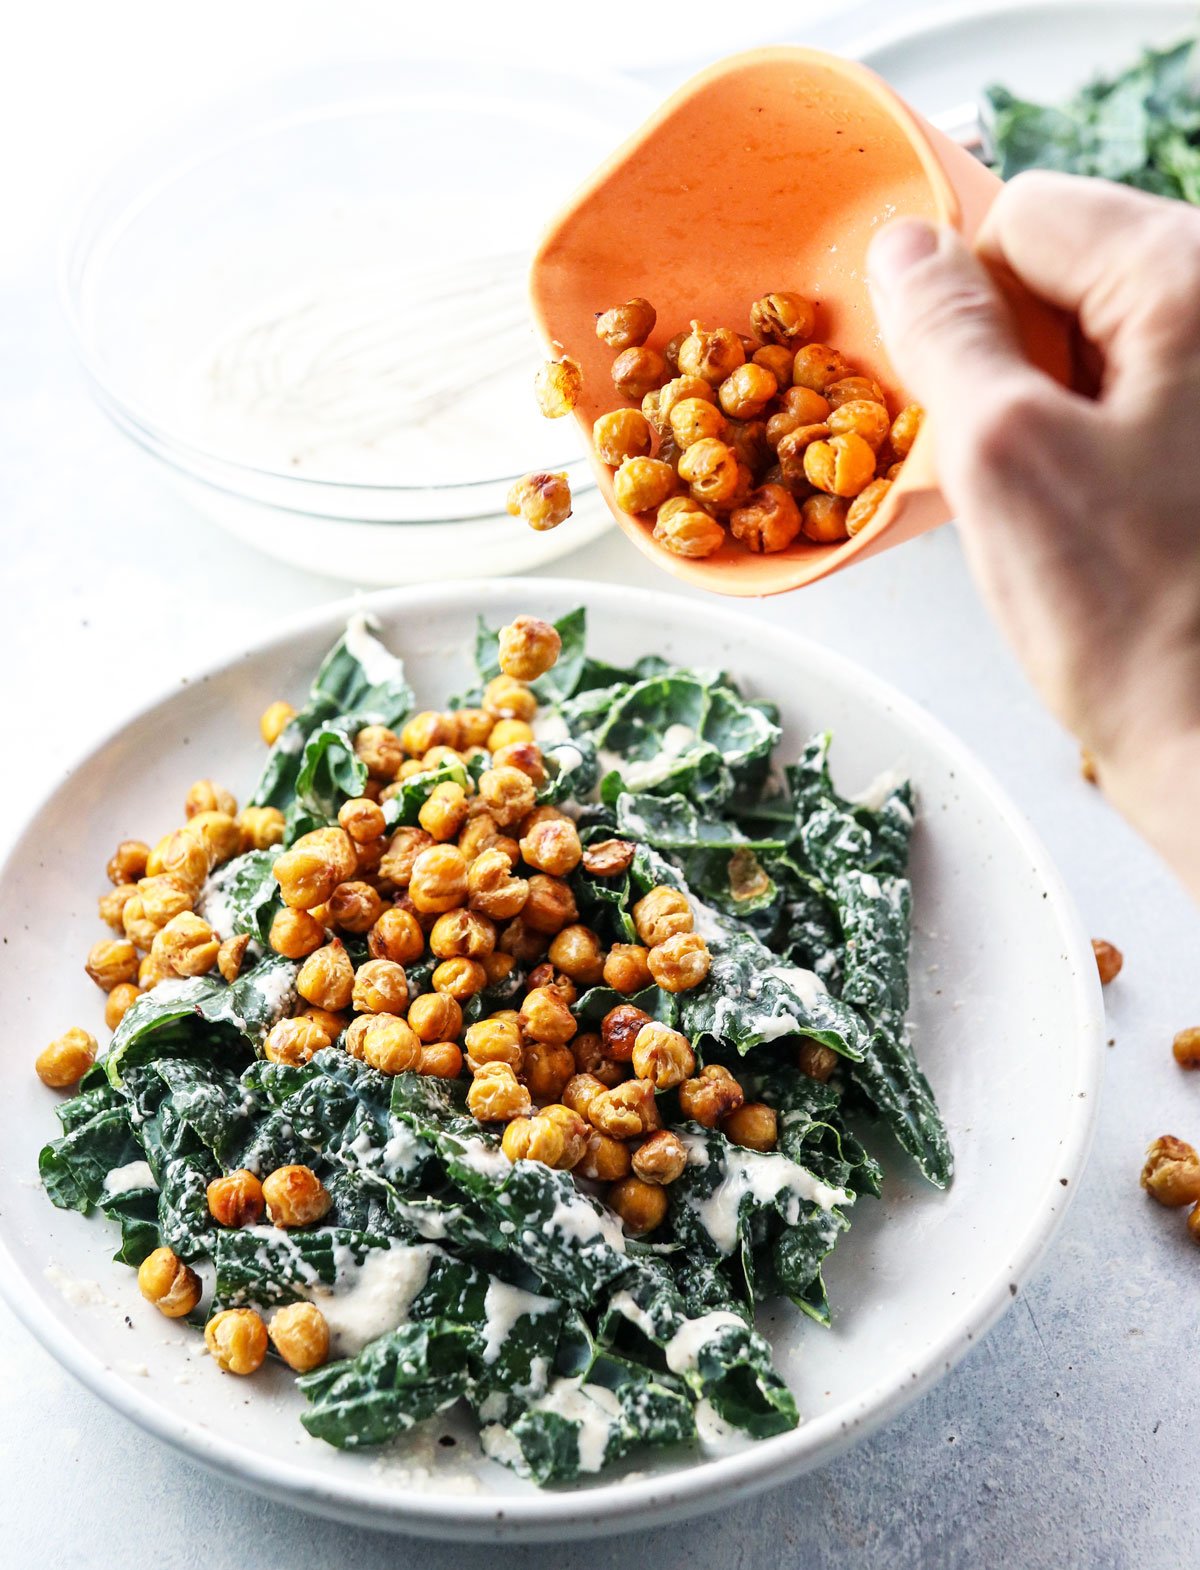 pouring roasted chickpeas over kale salad